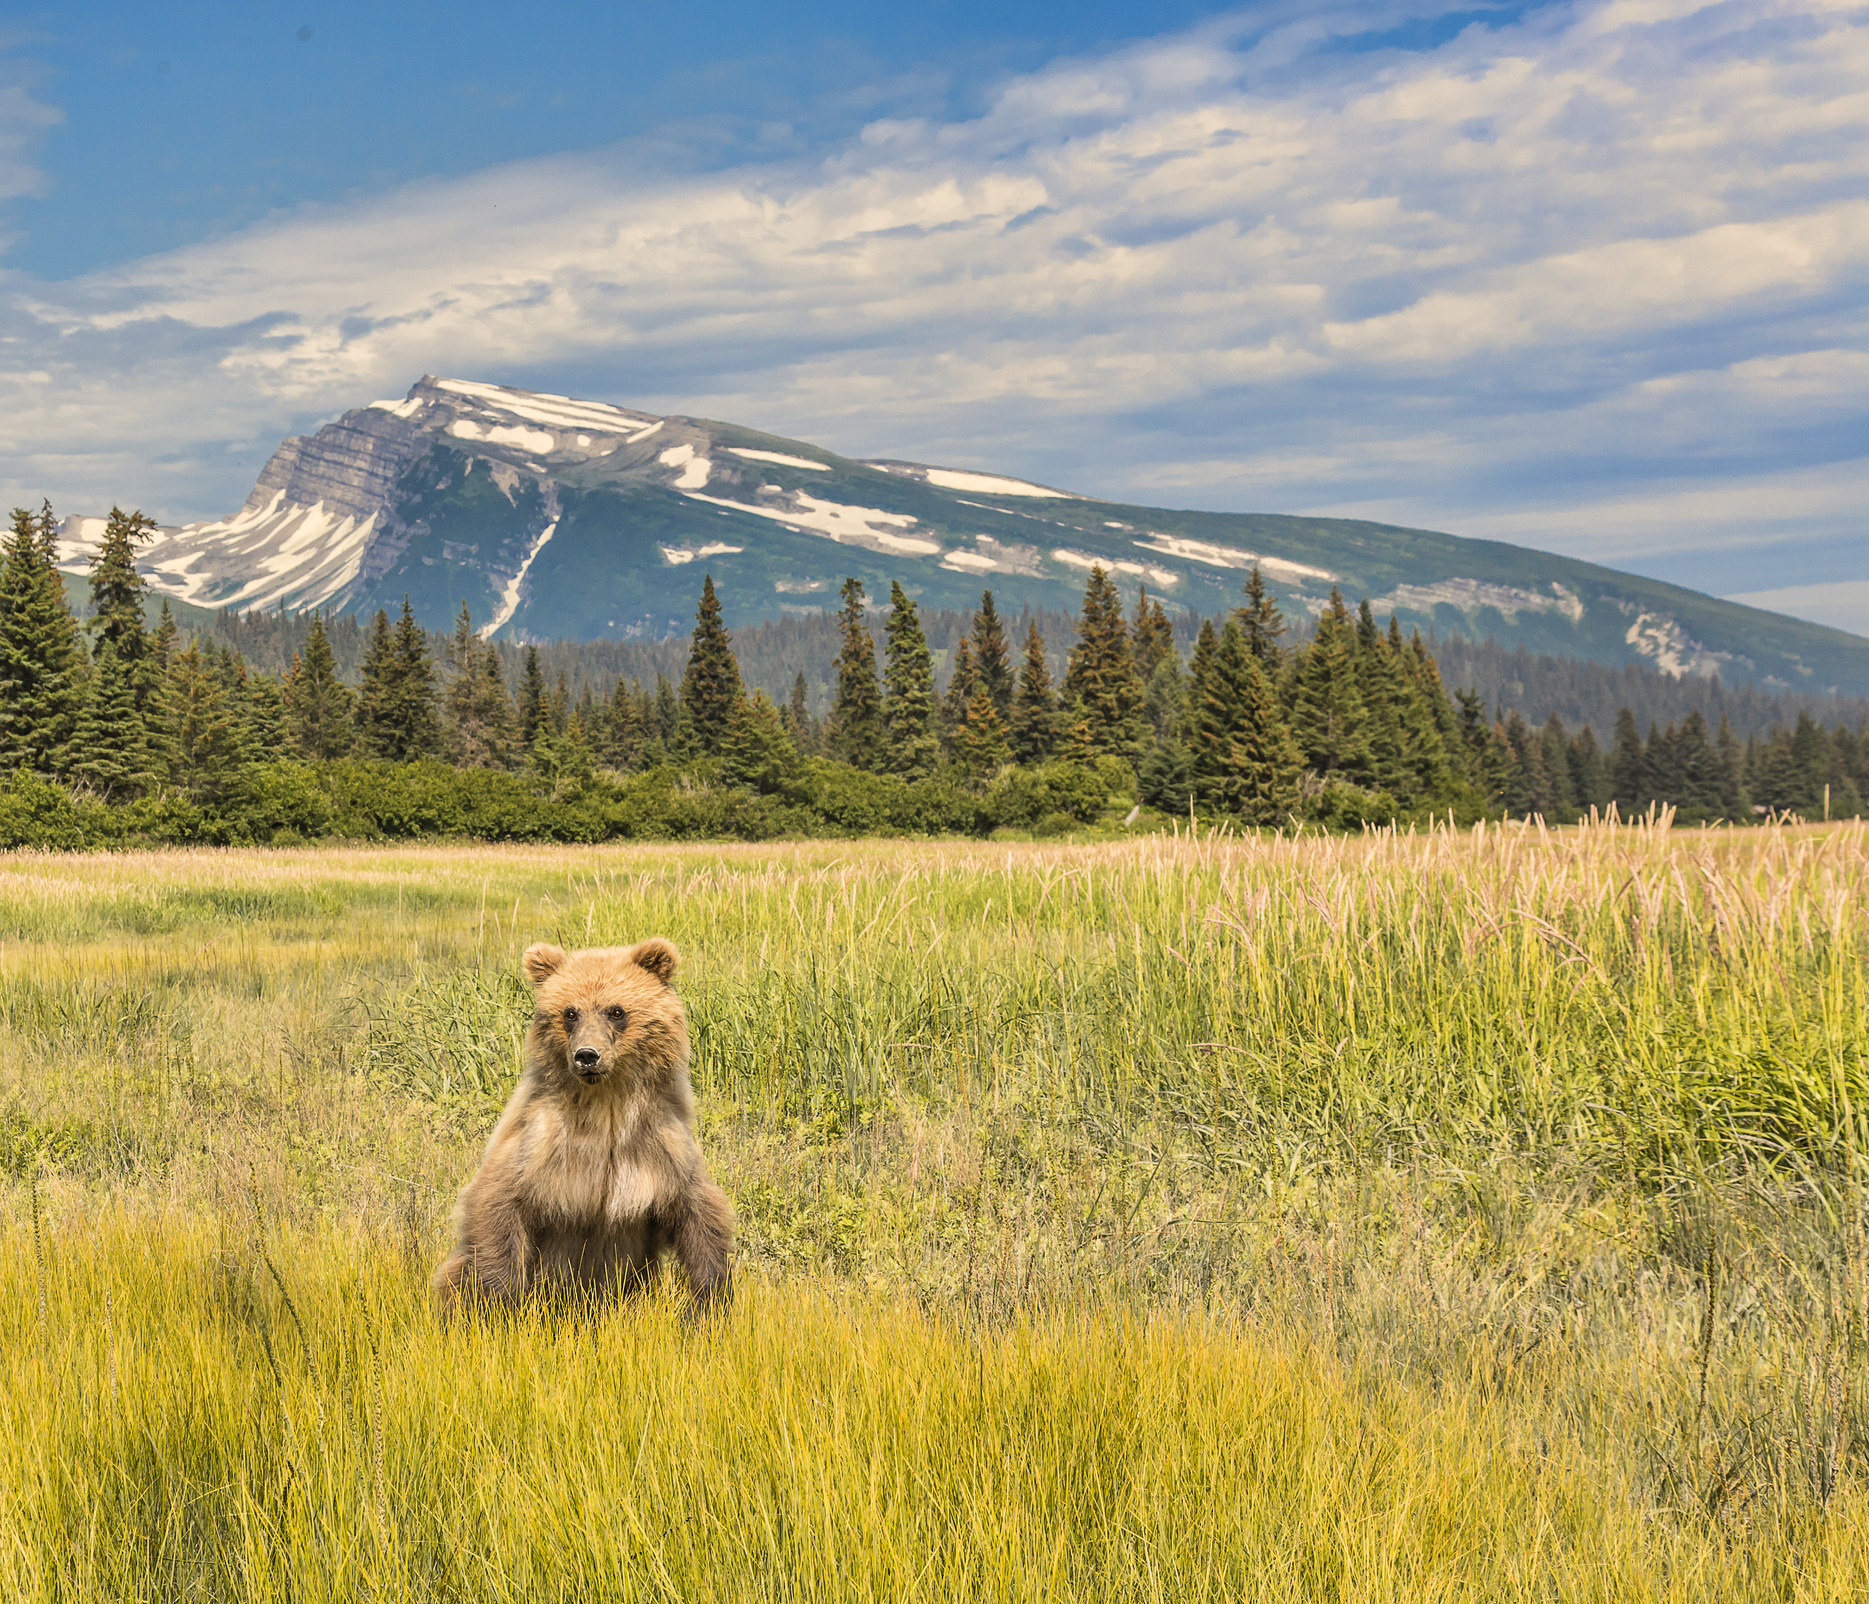 A grizzly bear standing in a patch of grass before a mountain backdrop in  Lake Clark National Park.